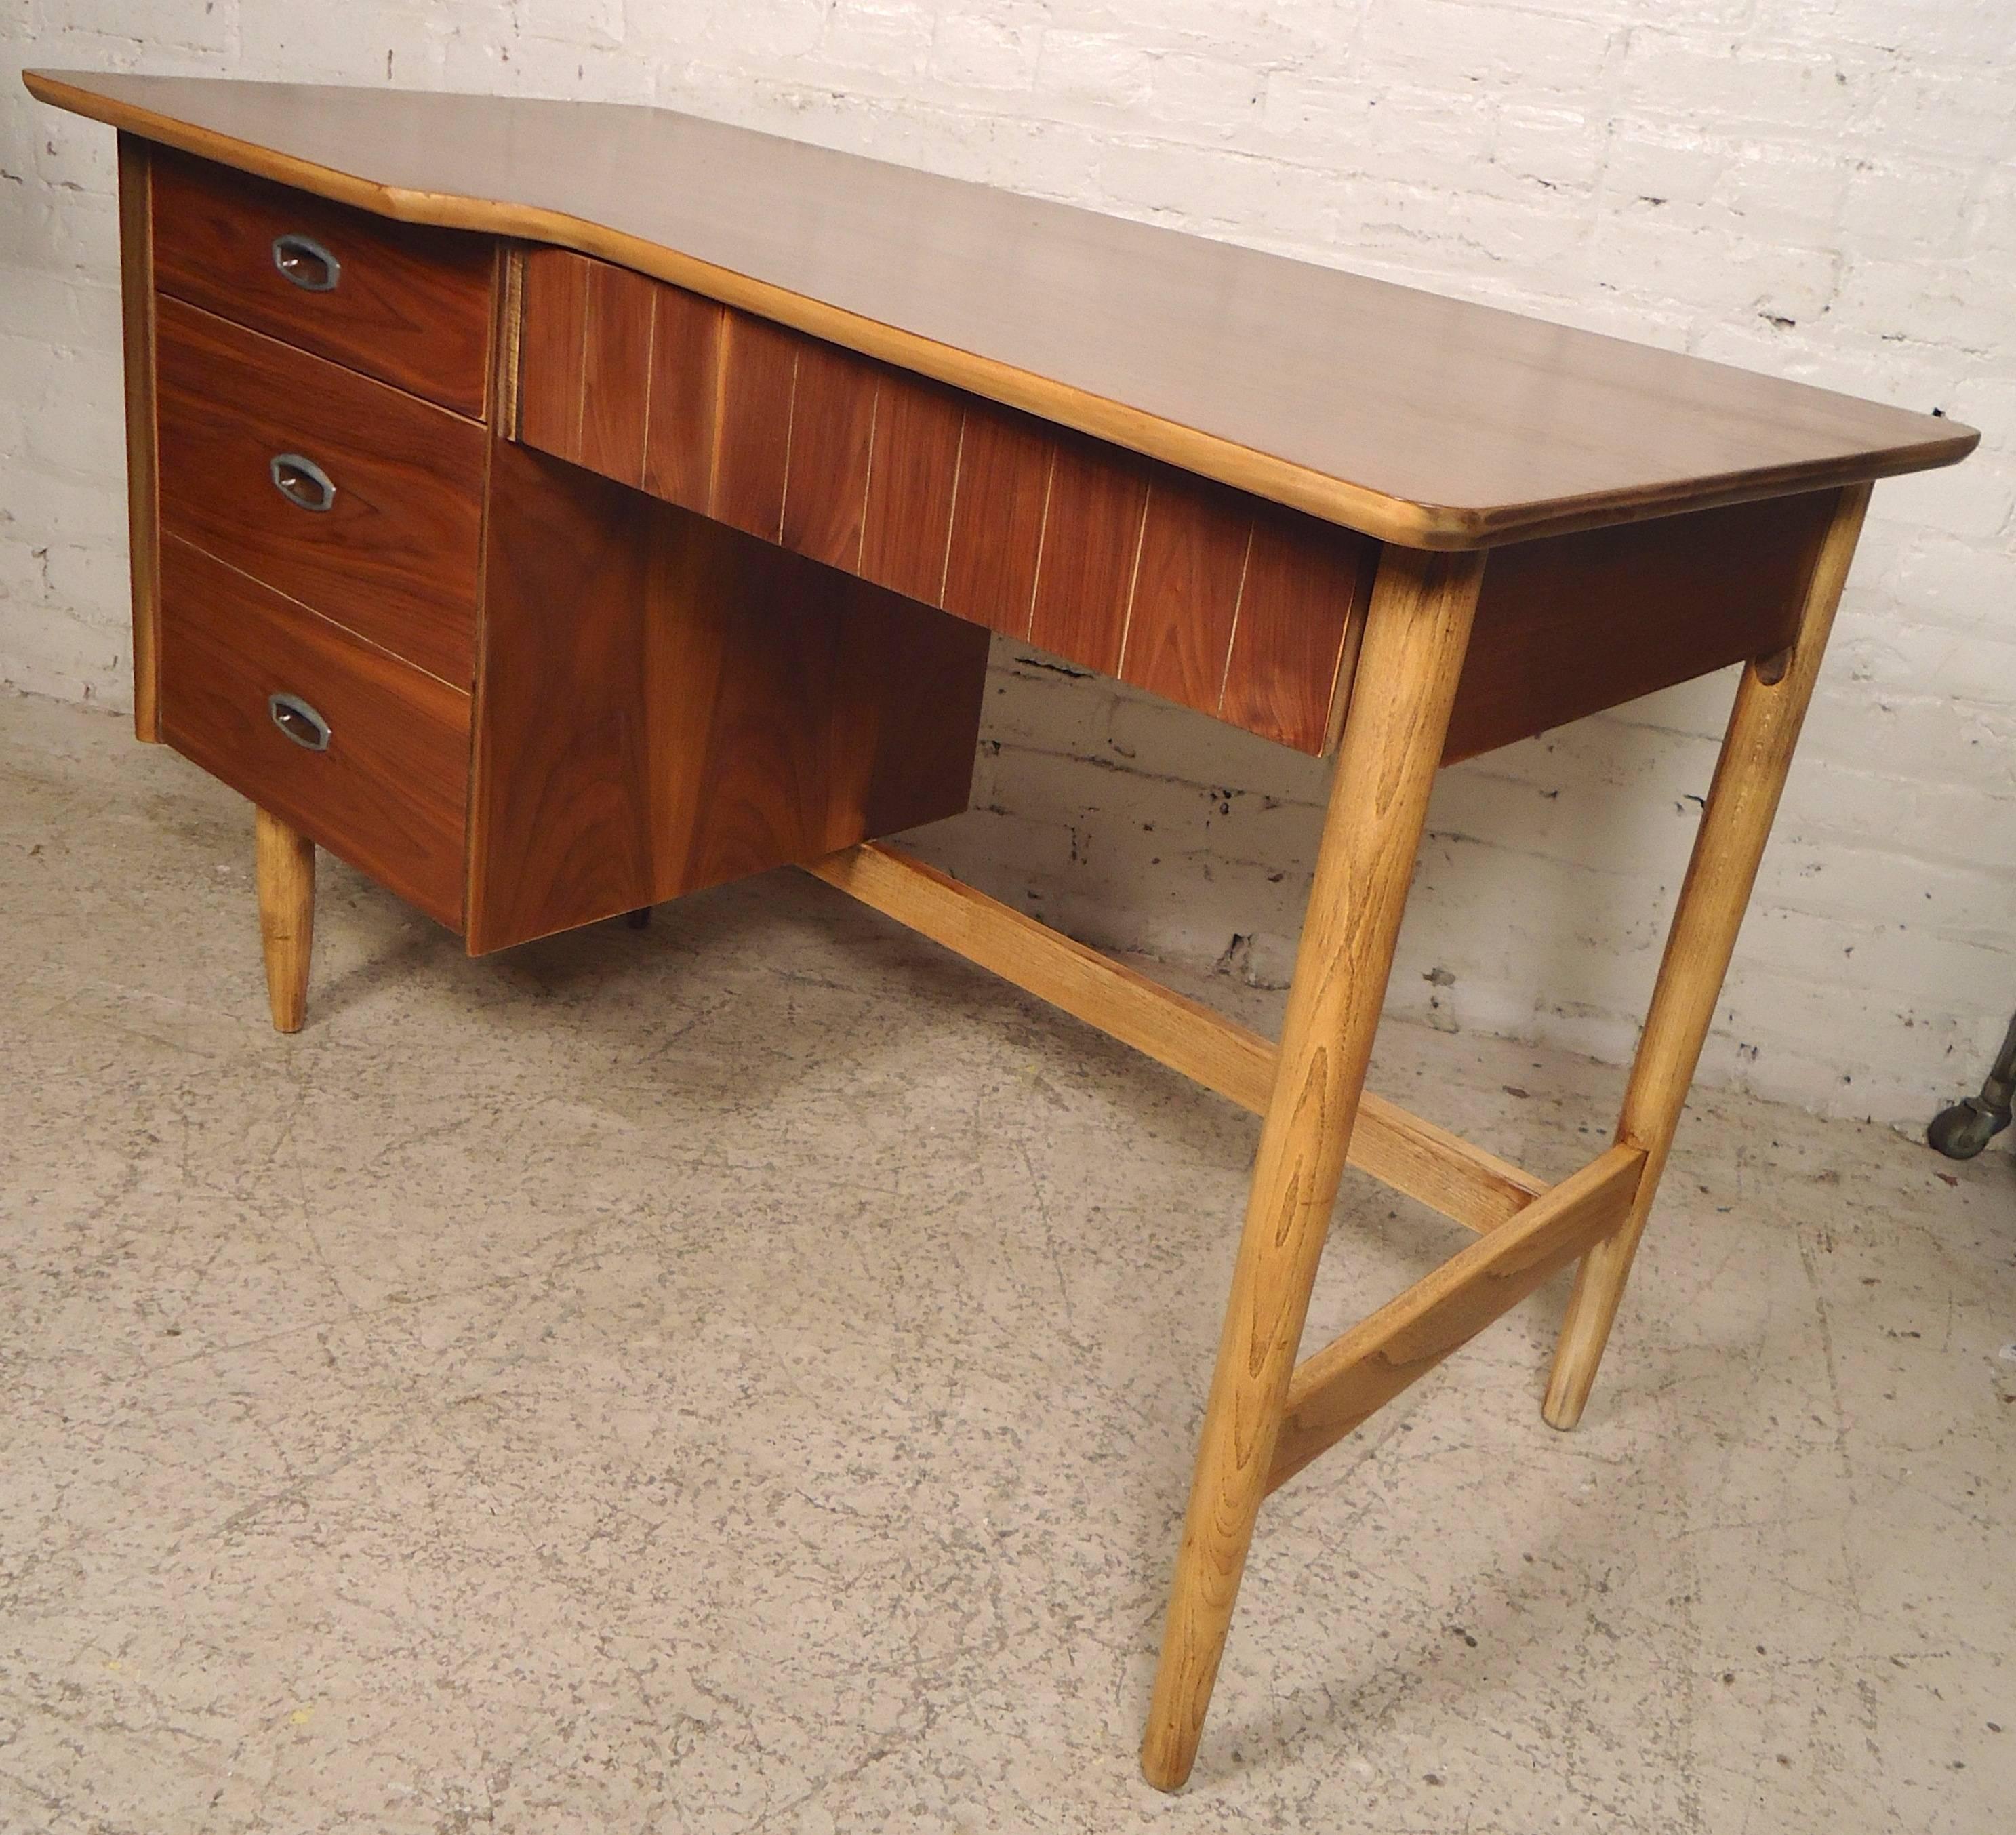 Vintage modern walnut desk with three drawers and kidney style cut away top. Attractive blonde legs accent the warm walnut grain. Finished back allows for mid-room placement.
Kneehole measures: 24